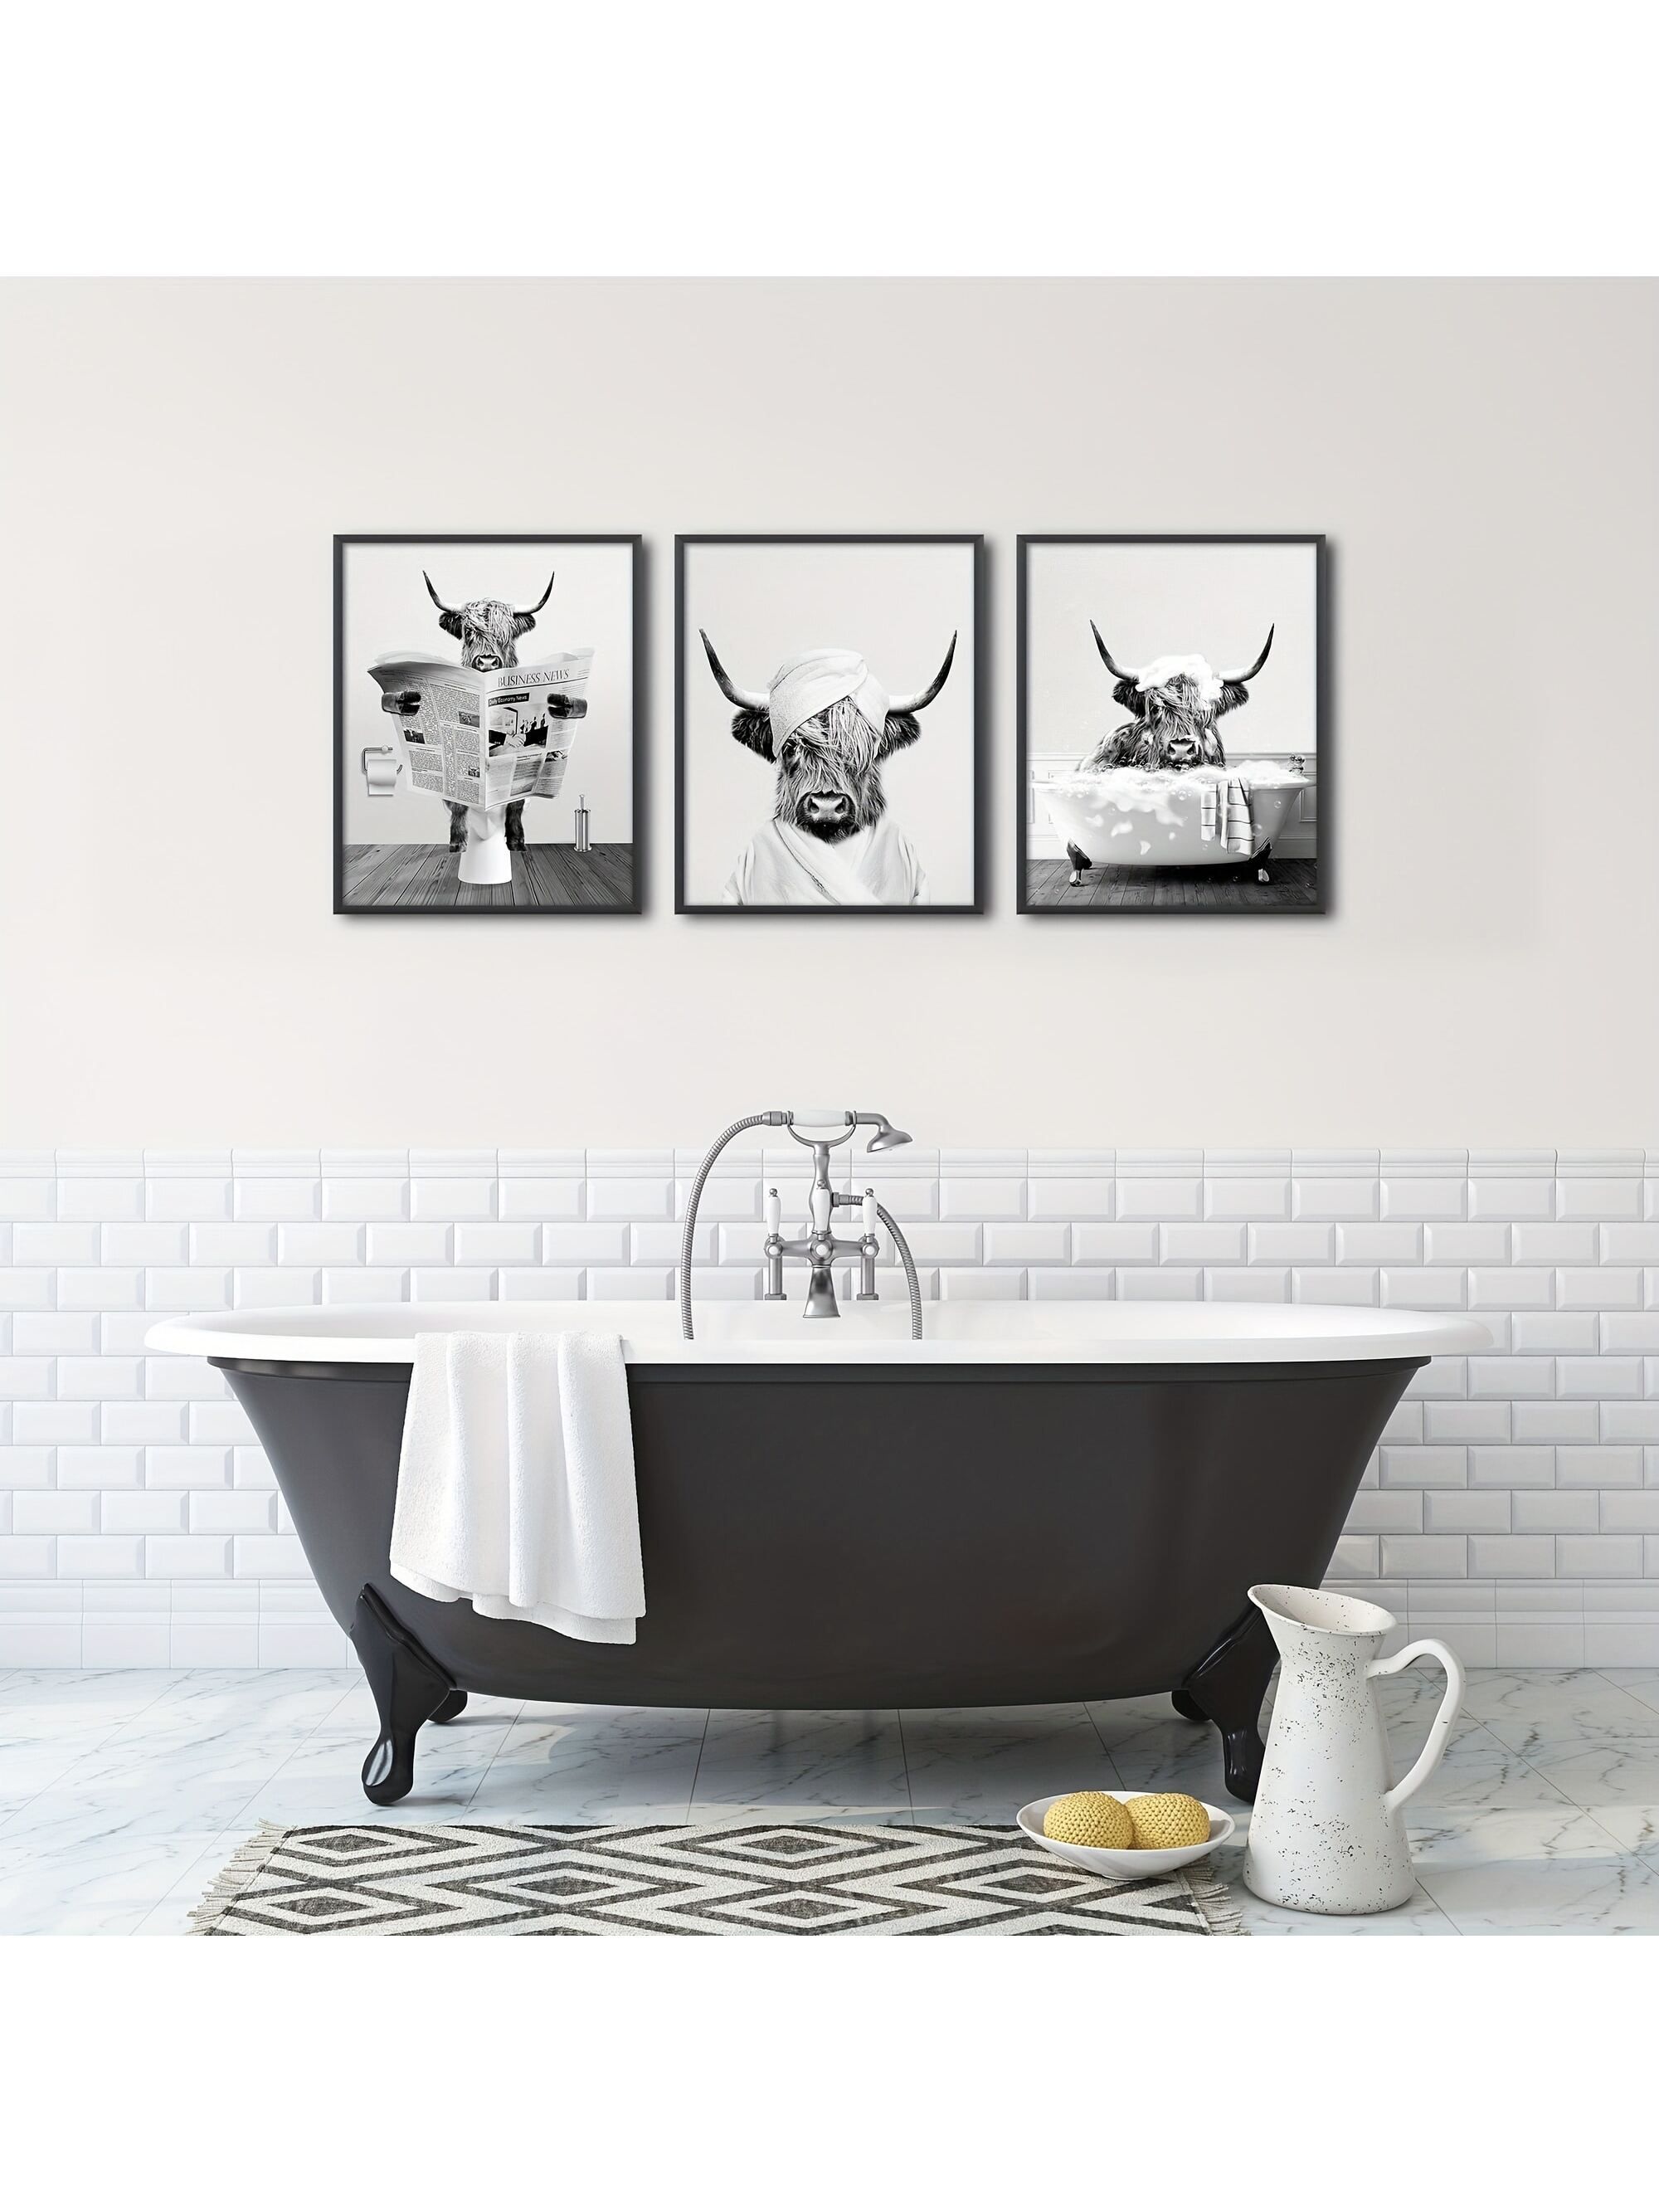 3pcs/set Funny Highland Cow Wall Art In Bathtub, Black And White Canvas Cow In Bathroom Picture, ... | SHEIN